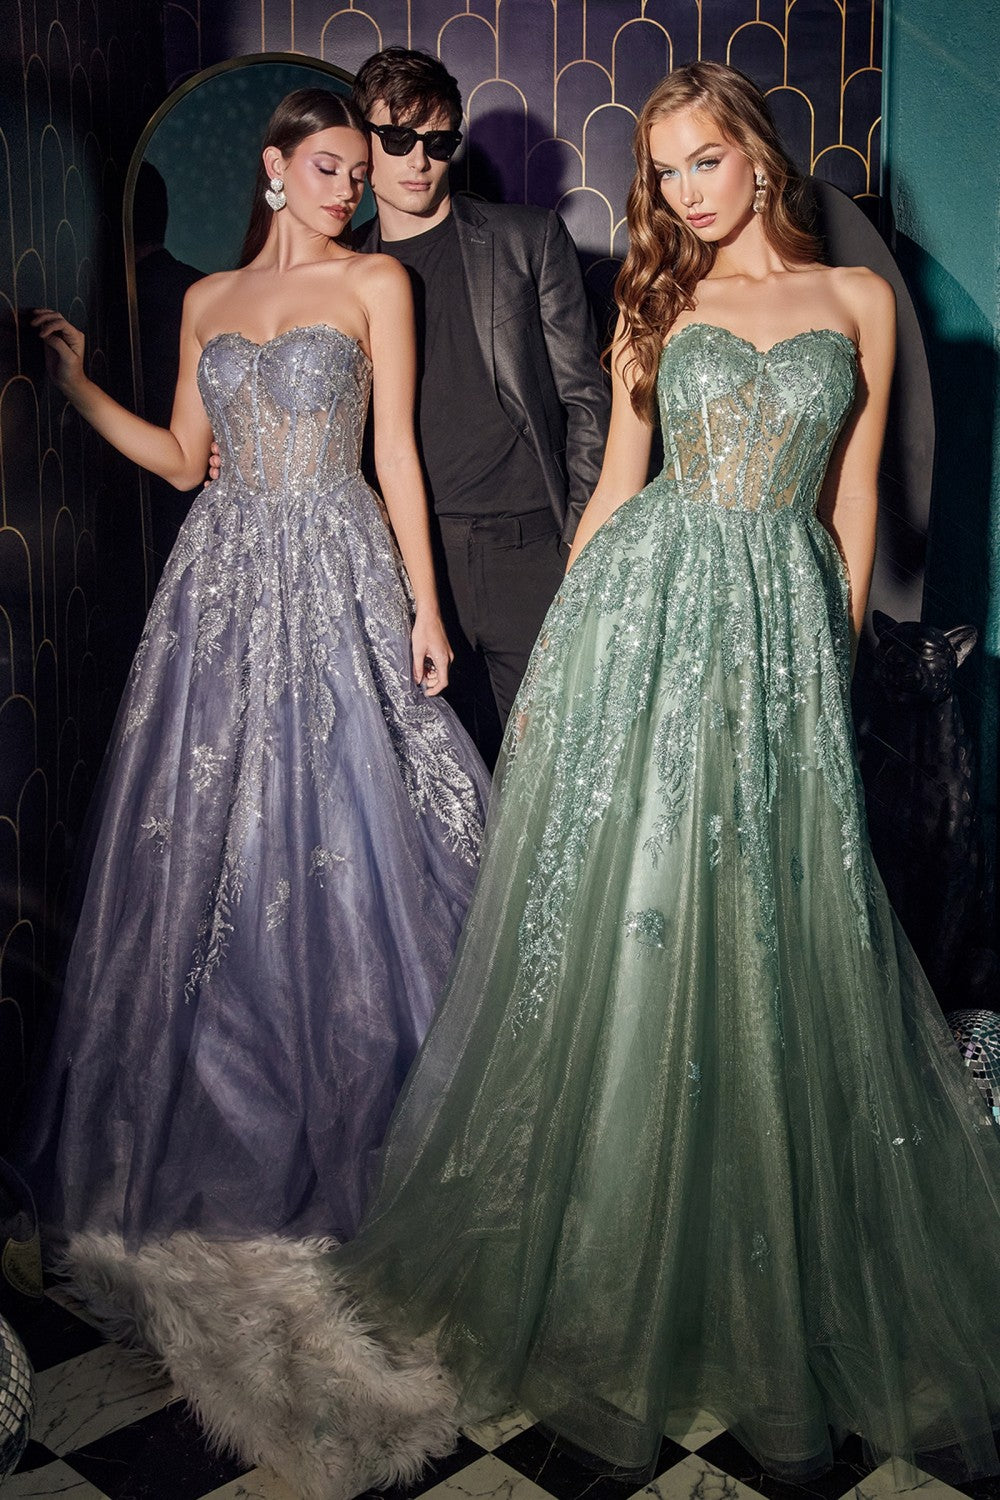 Smokyblue-Sage Strapless Layered Tulle Ball Gown J852 - Women Evening Formal Gown - Special Occasion